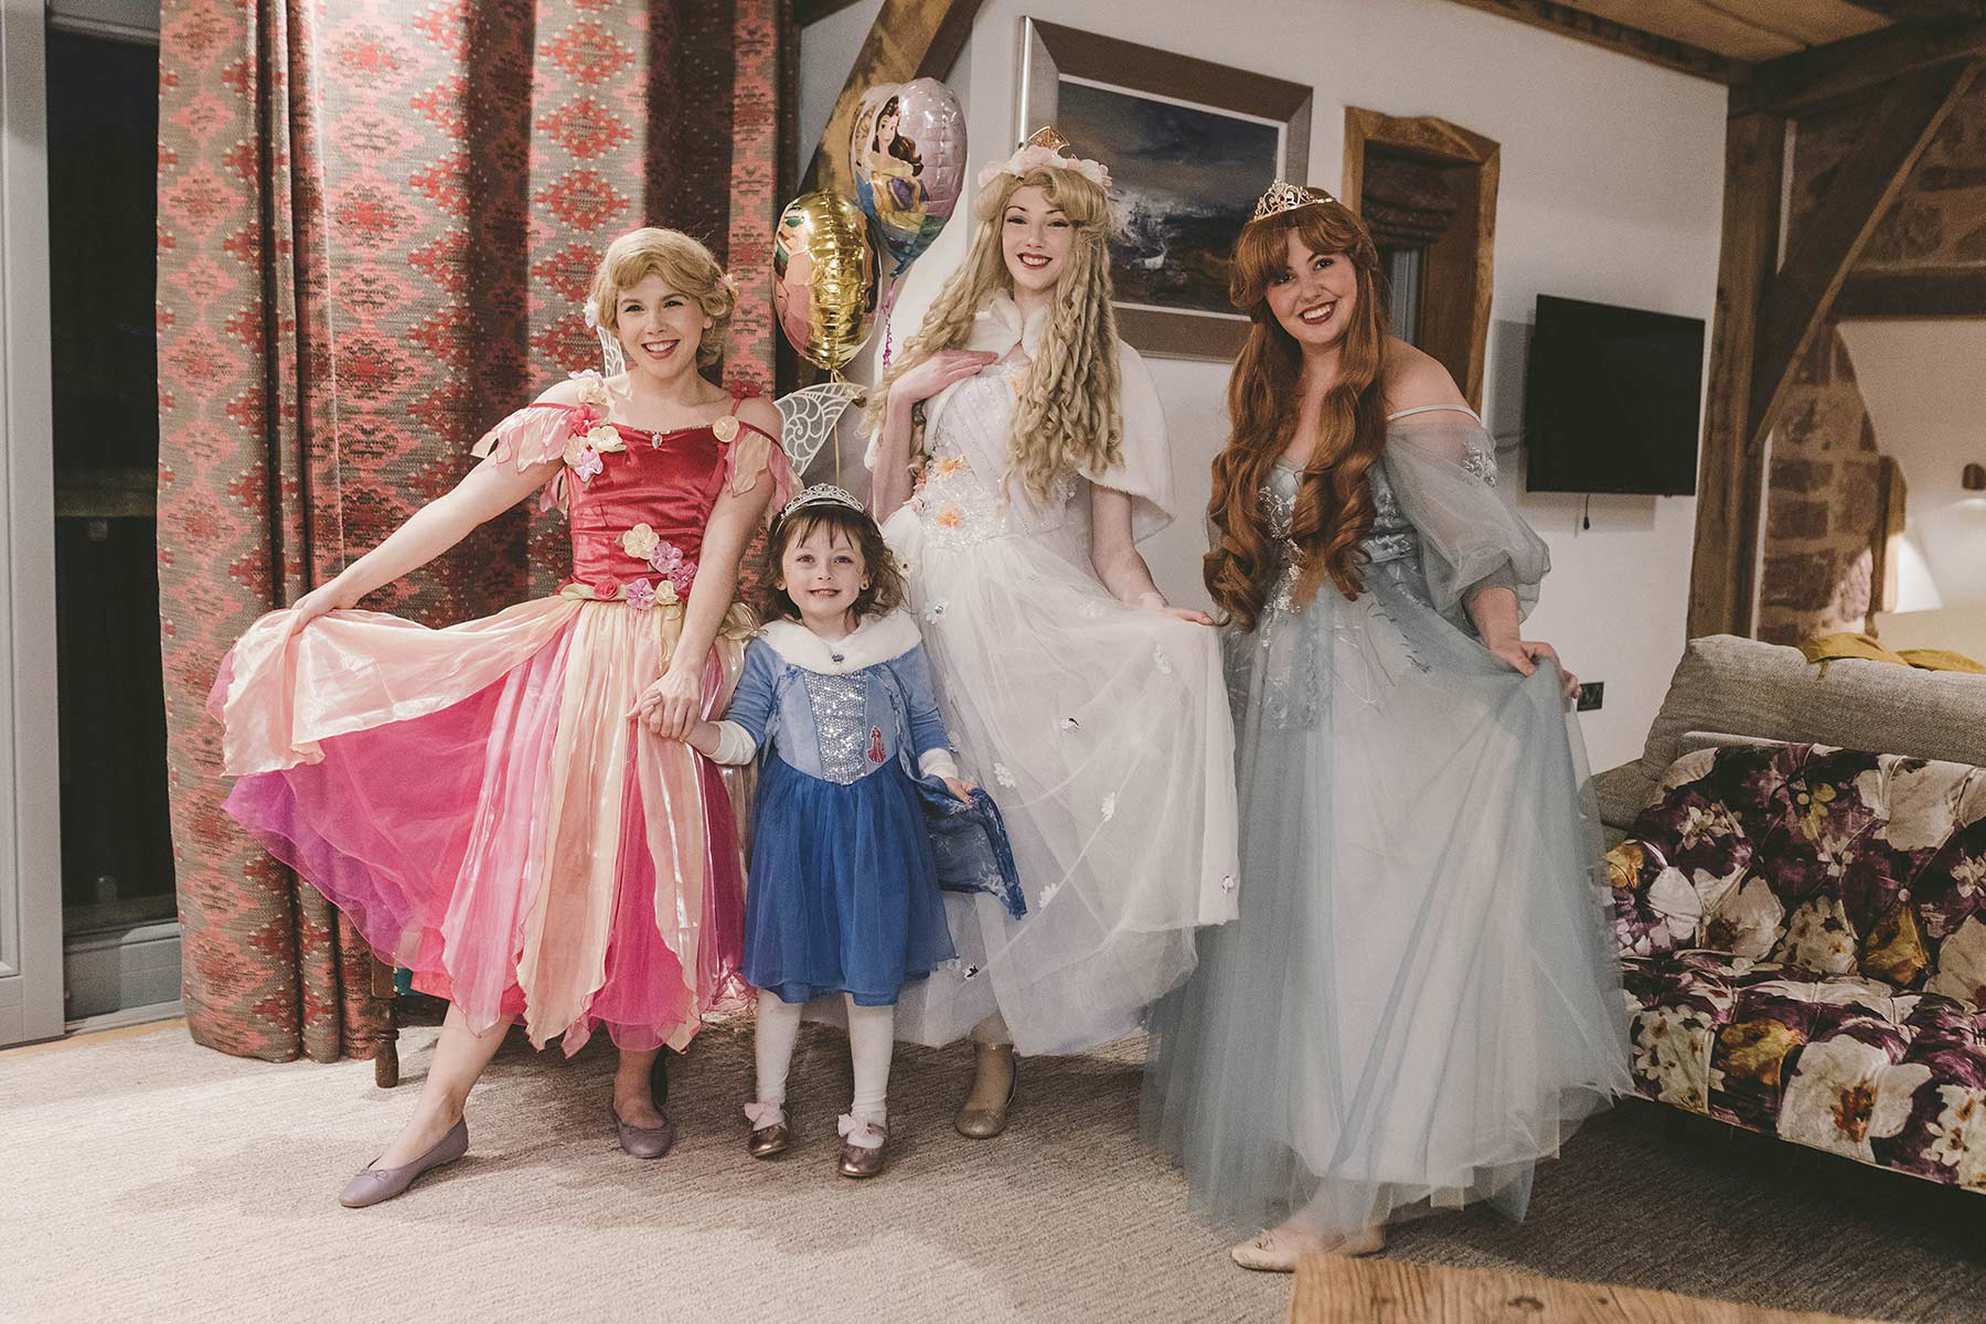 Ayssia, posing with three of her fellow princesses.